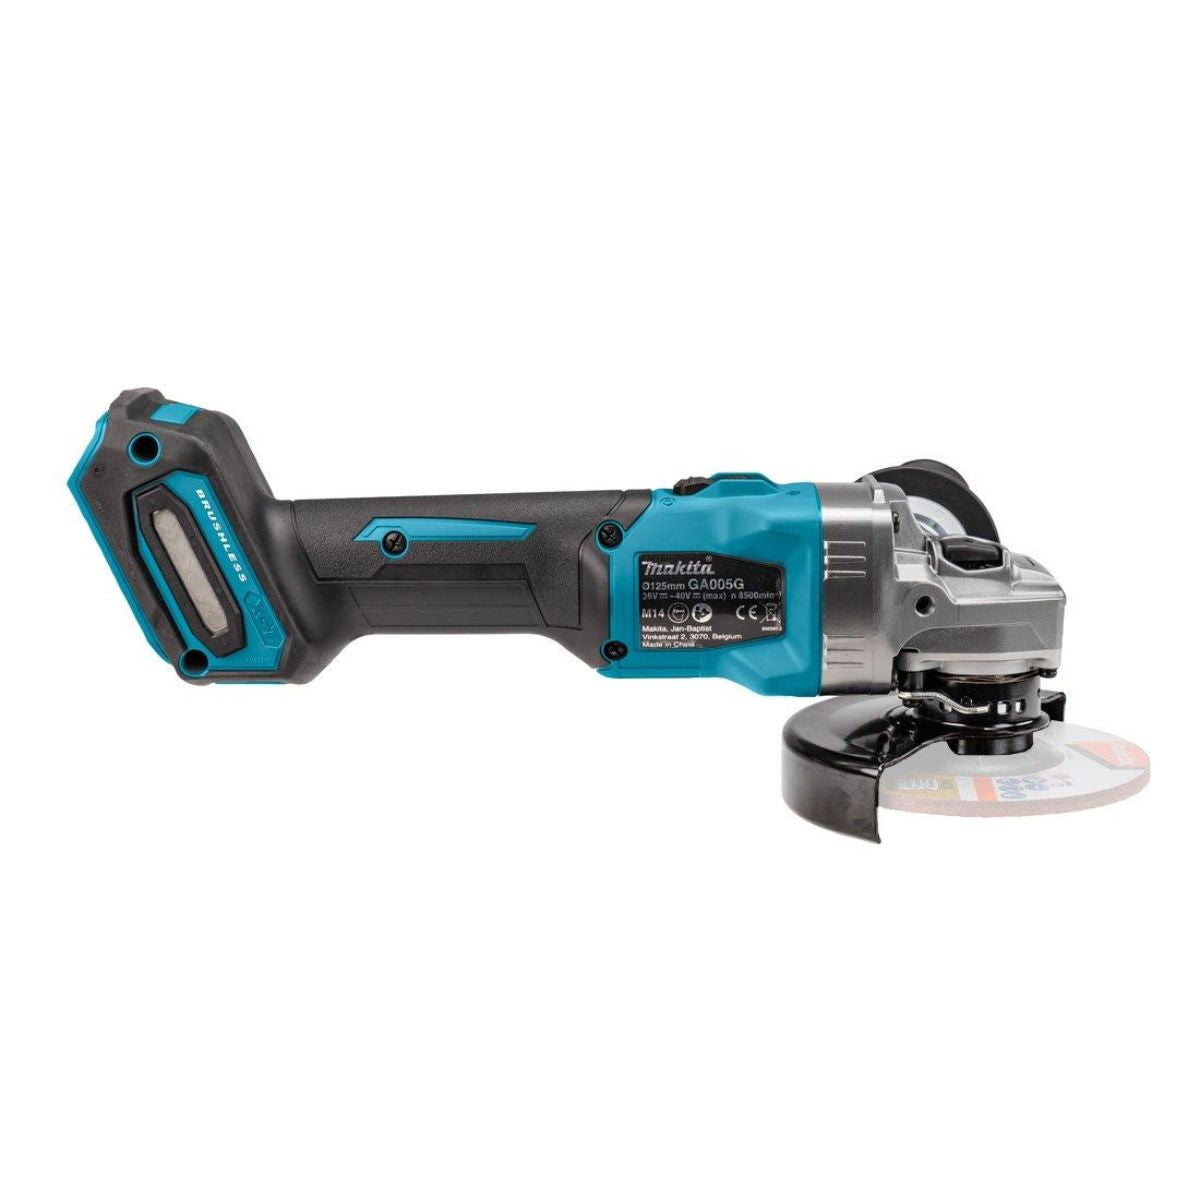 Makita GA005GZ01 40v Max XGT 125mm Brushless Angle Grinder Body Only With Carry Case